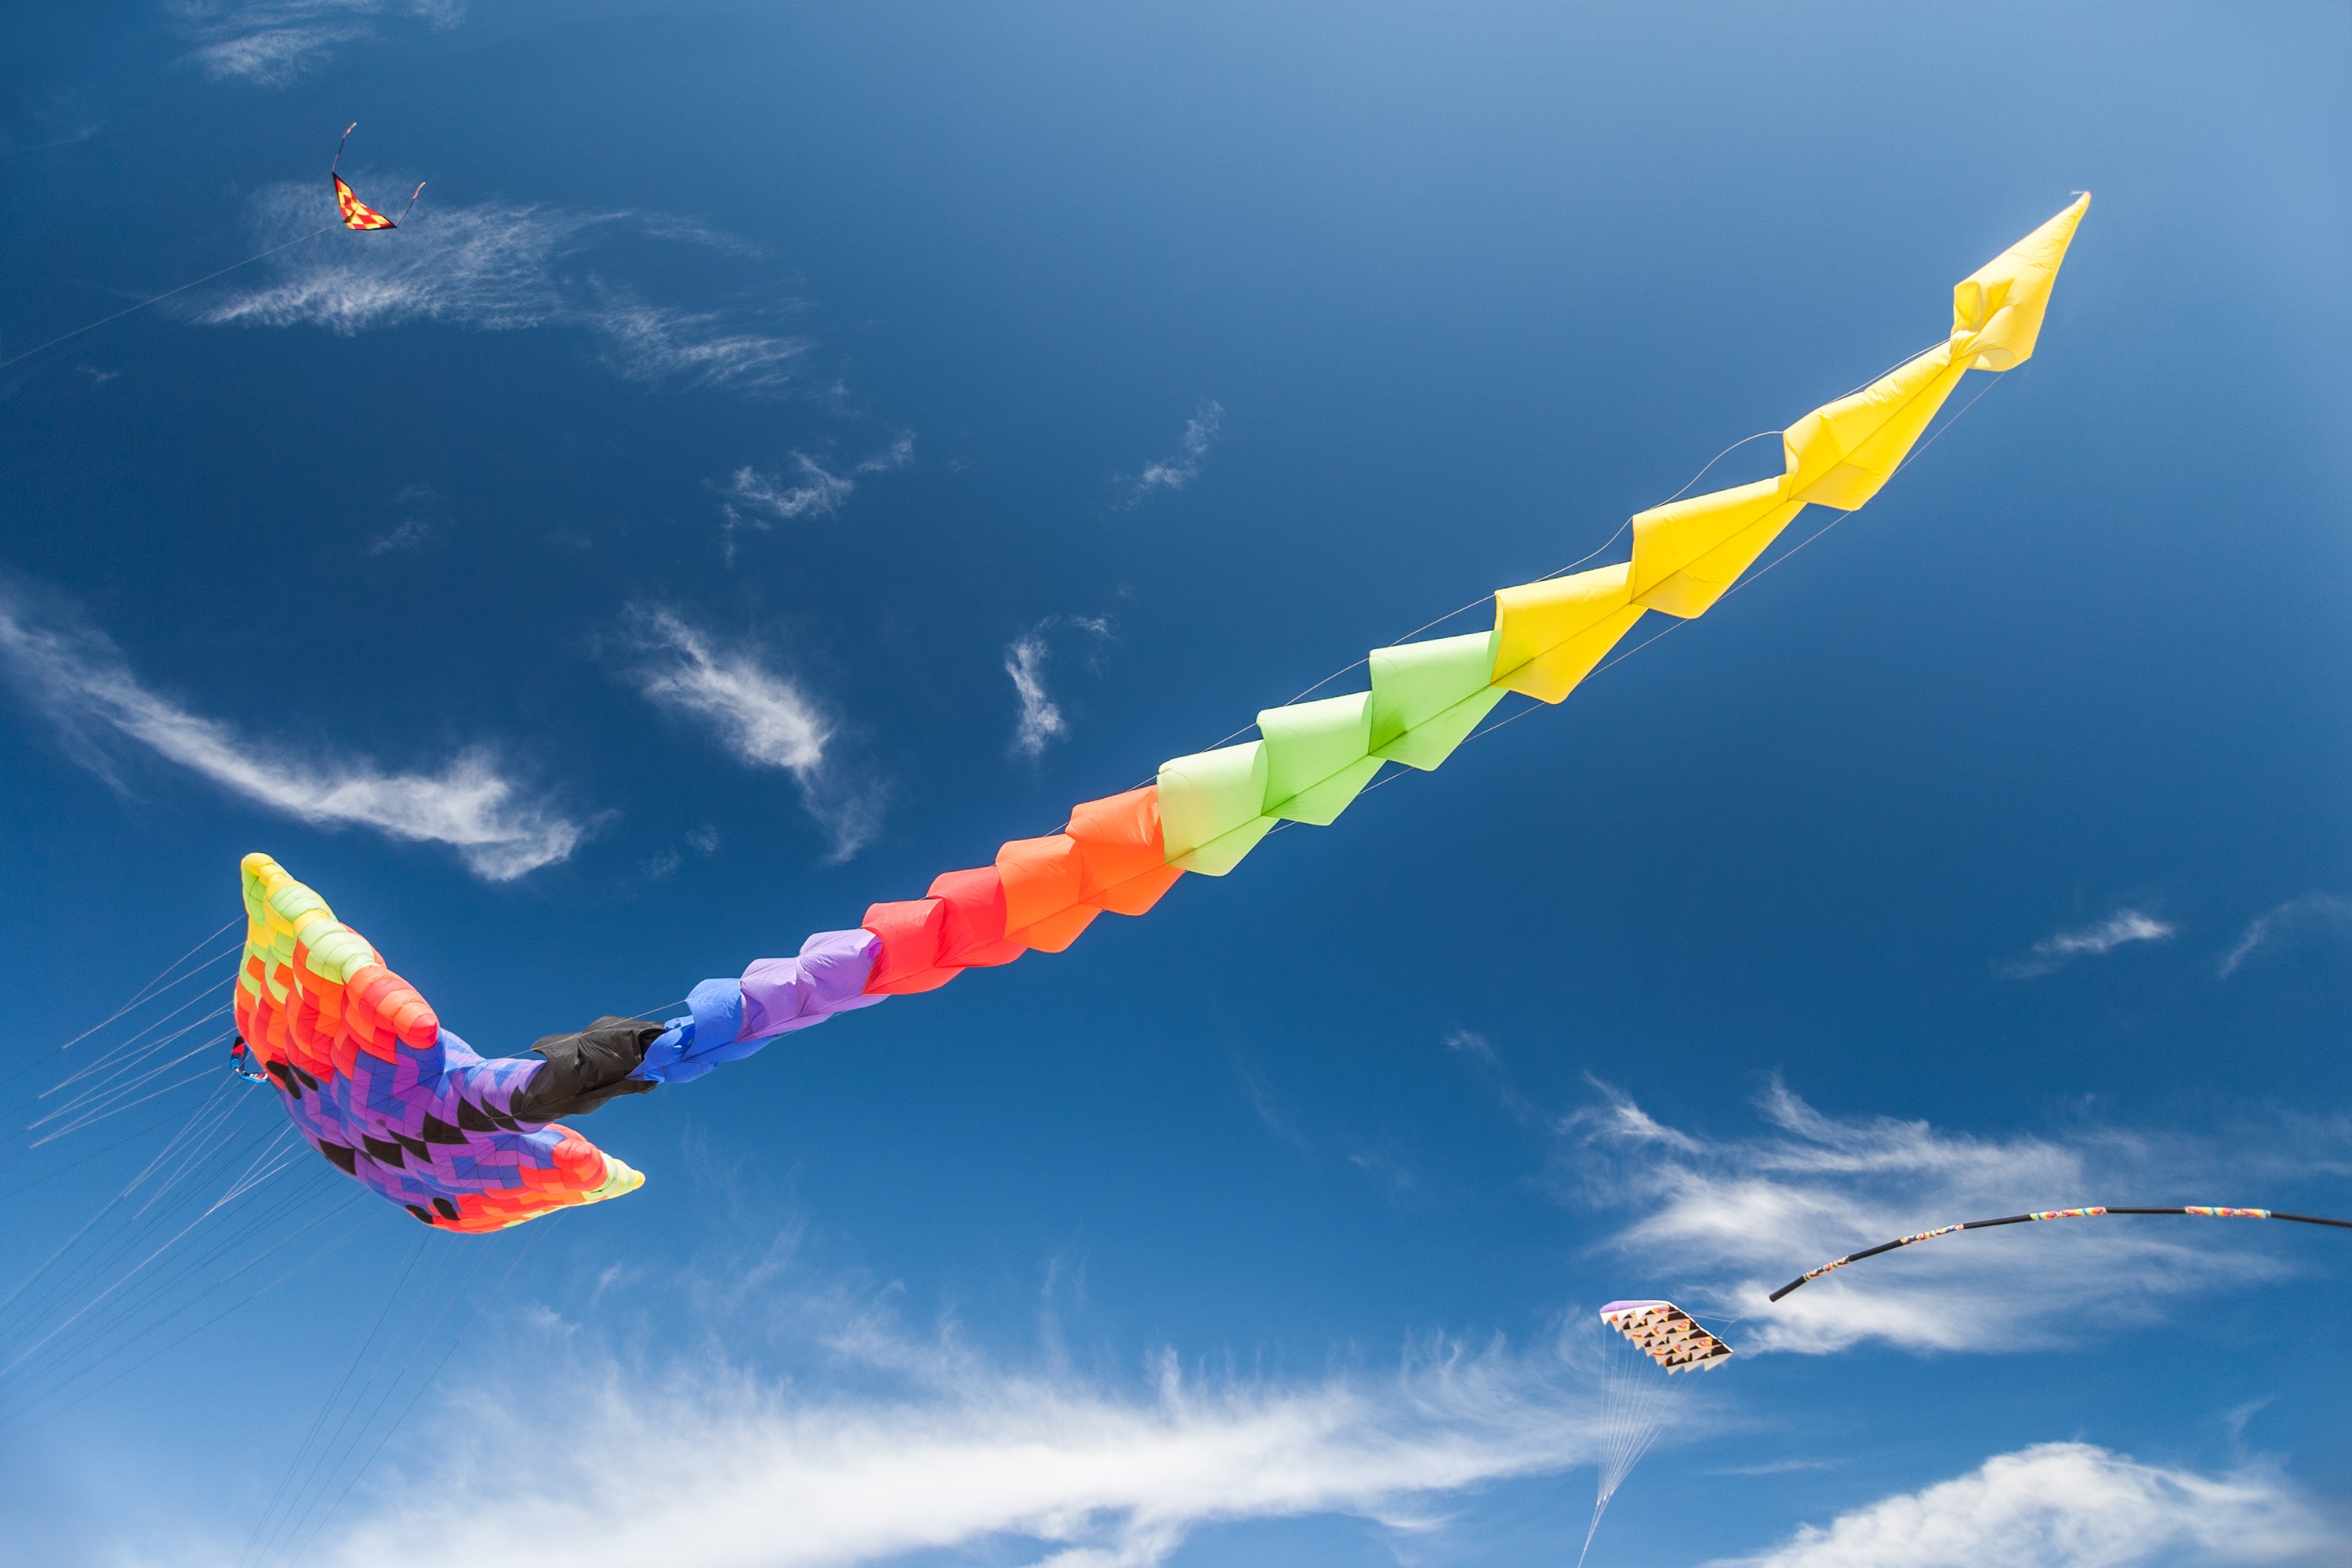 man made, kite, colorful, colors, flying, sky